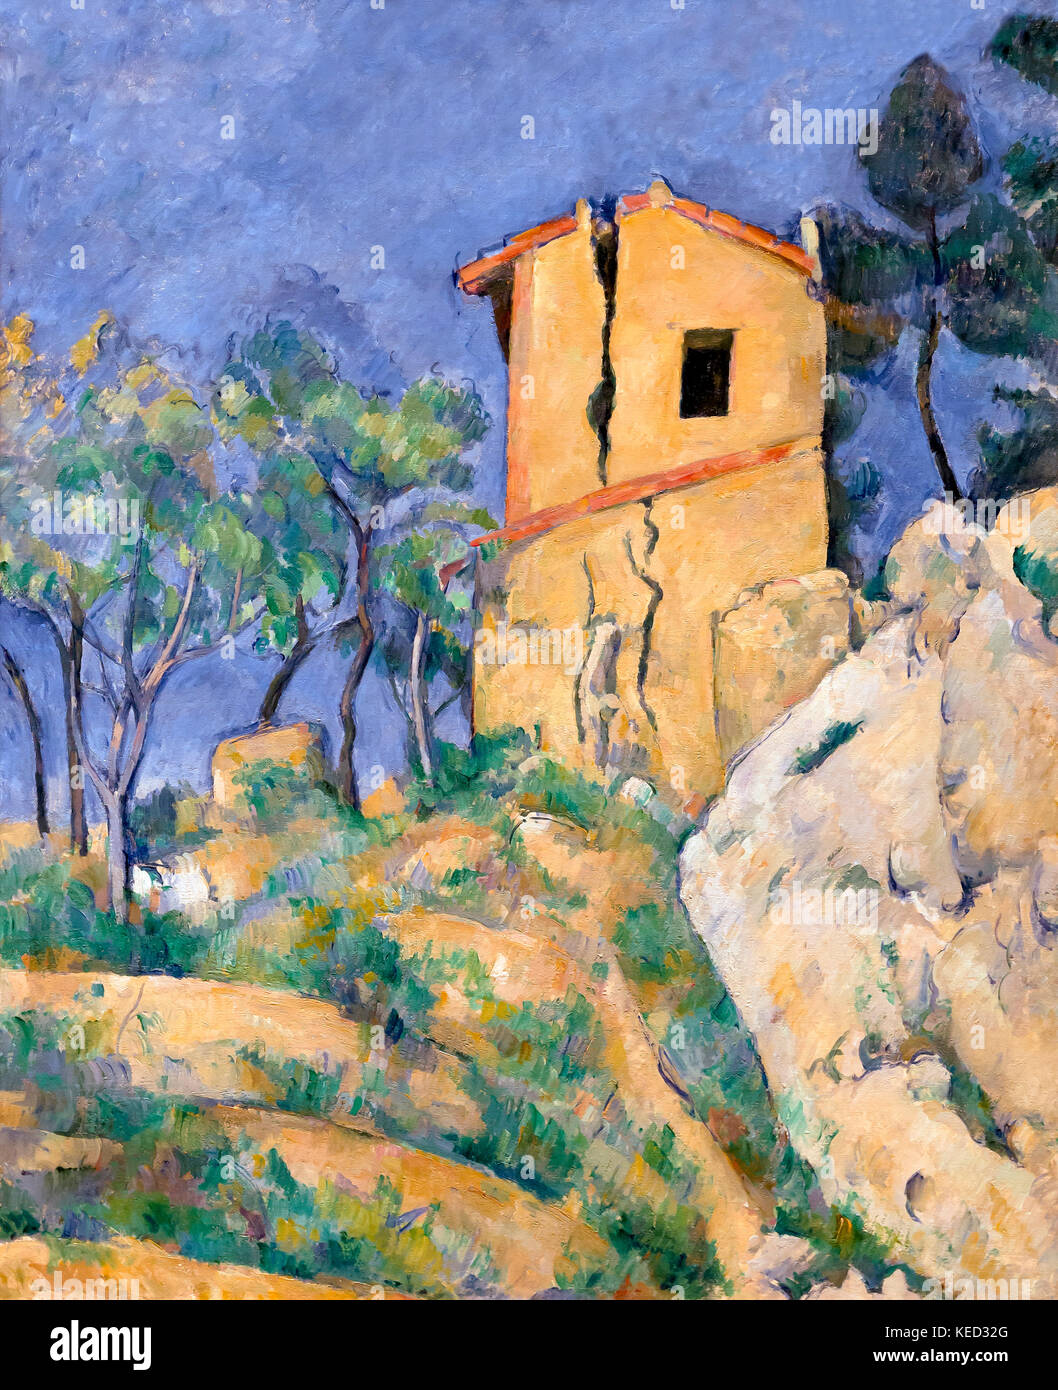 The House with the Cracked Walls, Paul Cezanne, 1892-1894,  Metropolitan Museum of Art, Manhattan, New York City, USA, North America Stock Photo